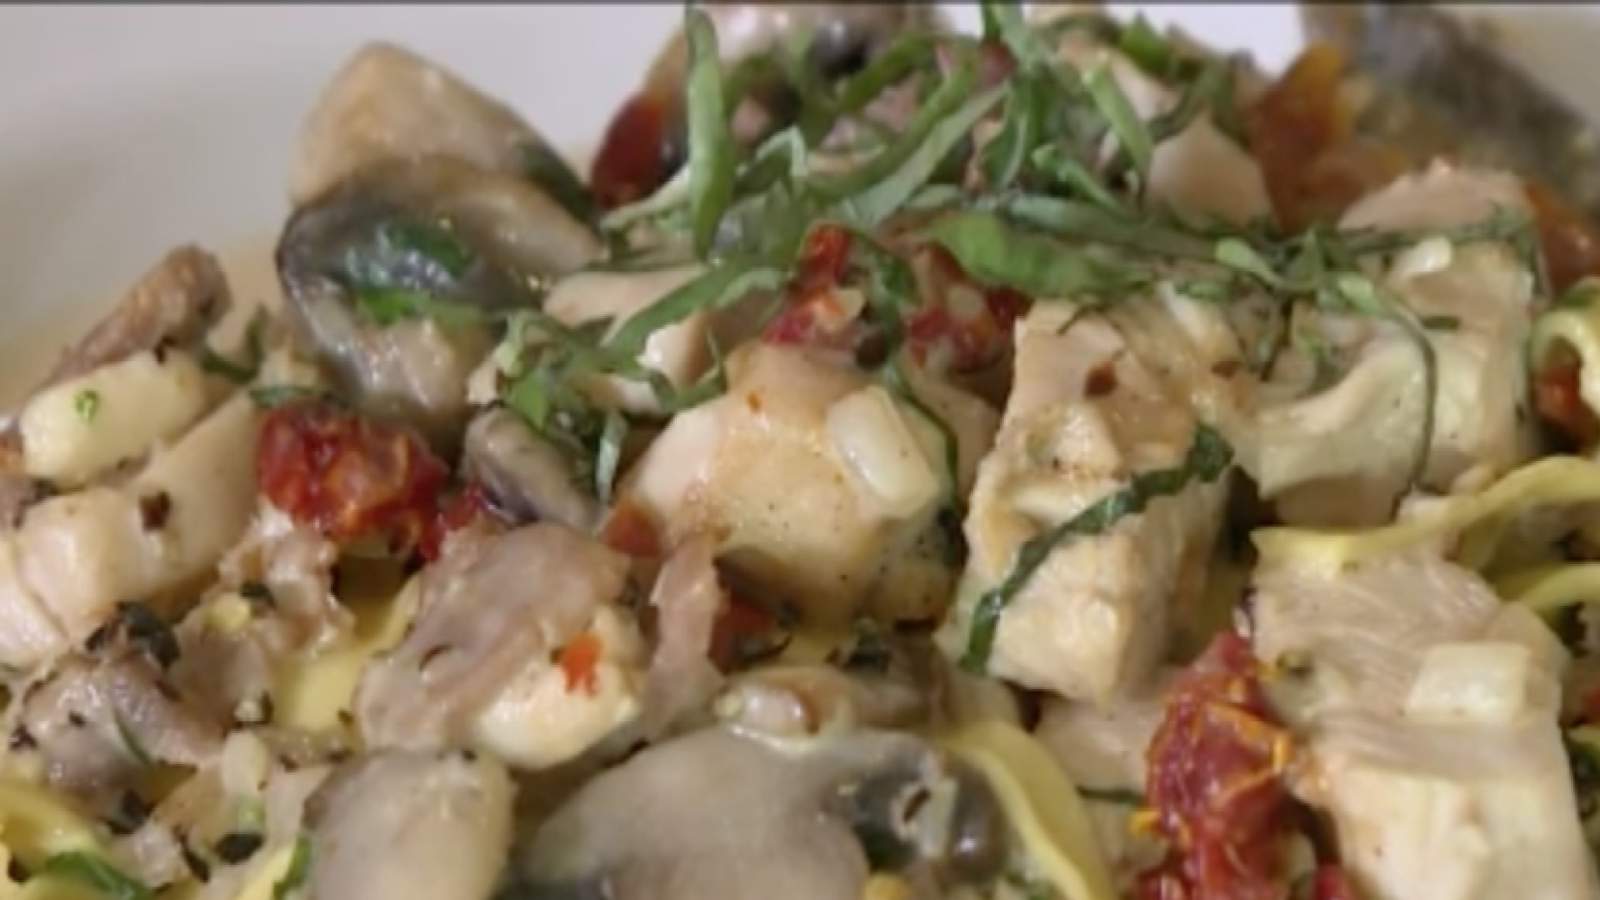 Takeout Shoutout: Bellissimo Ristorante in The Heights